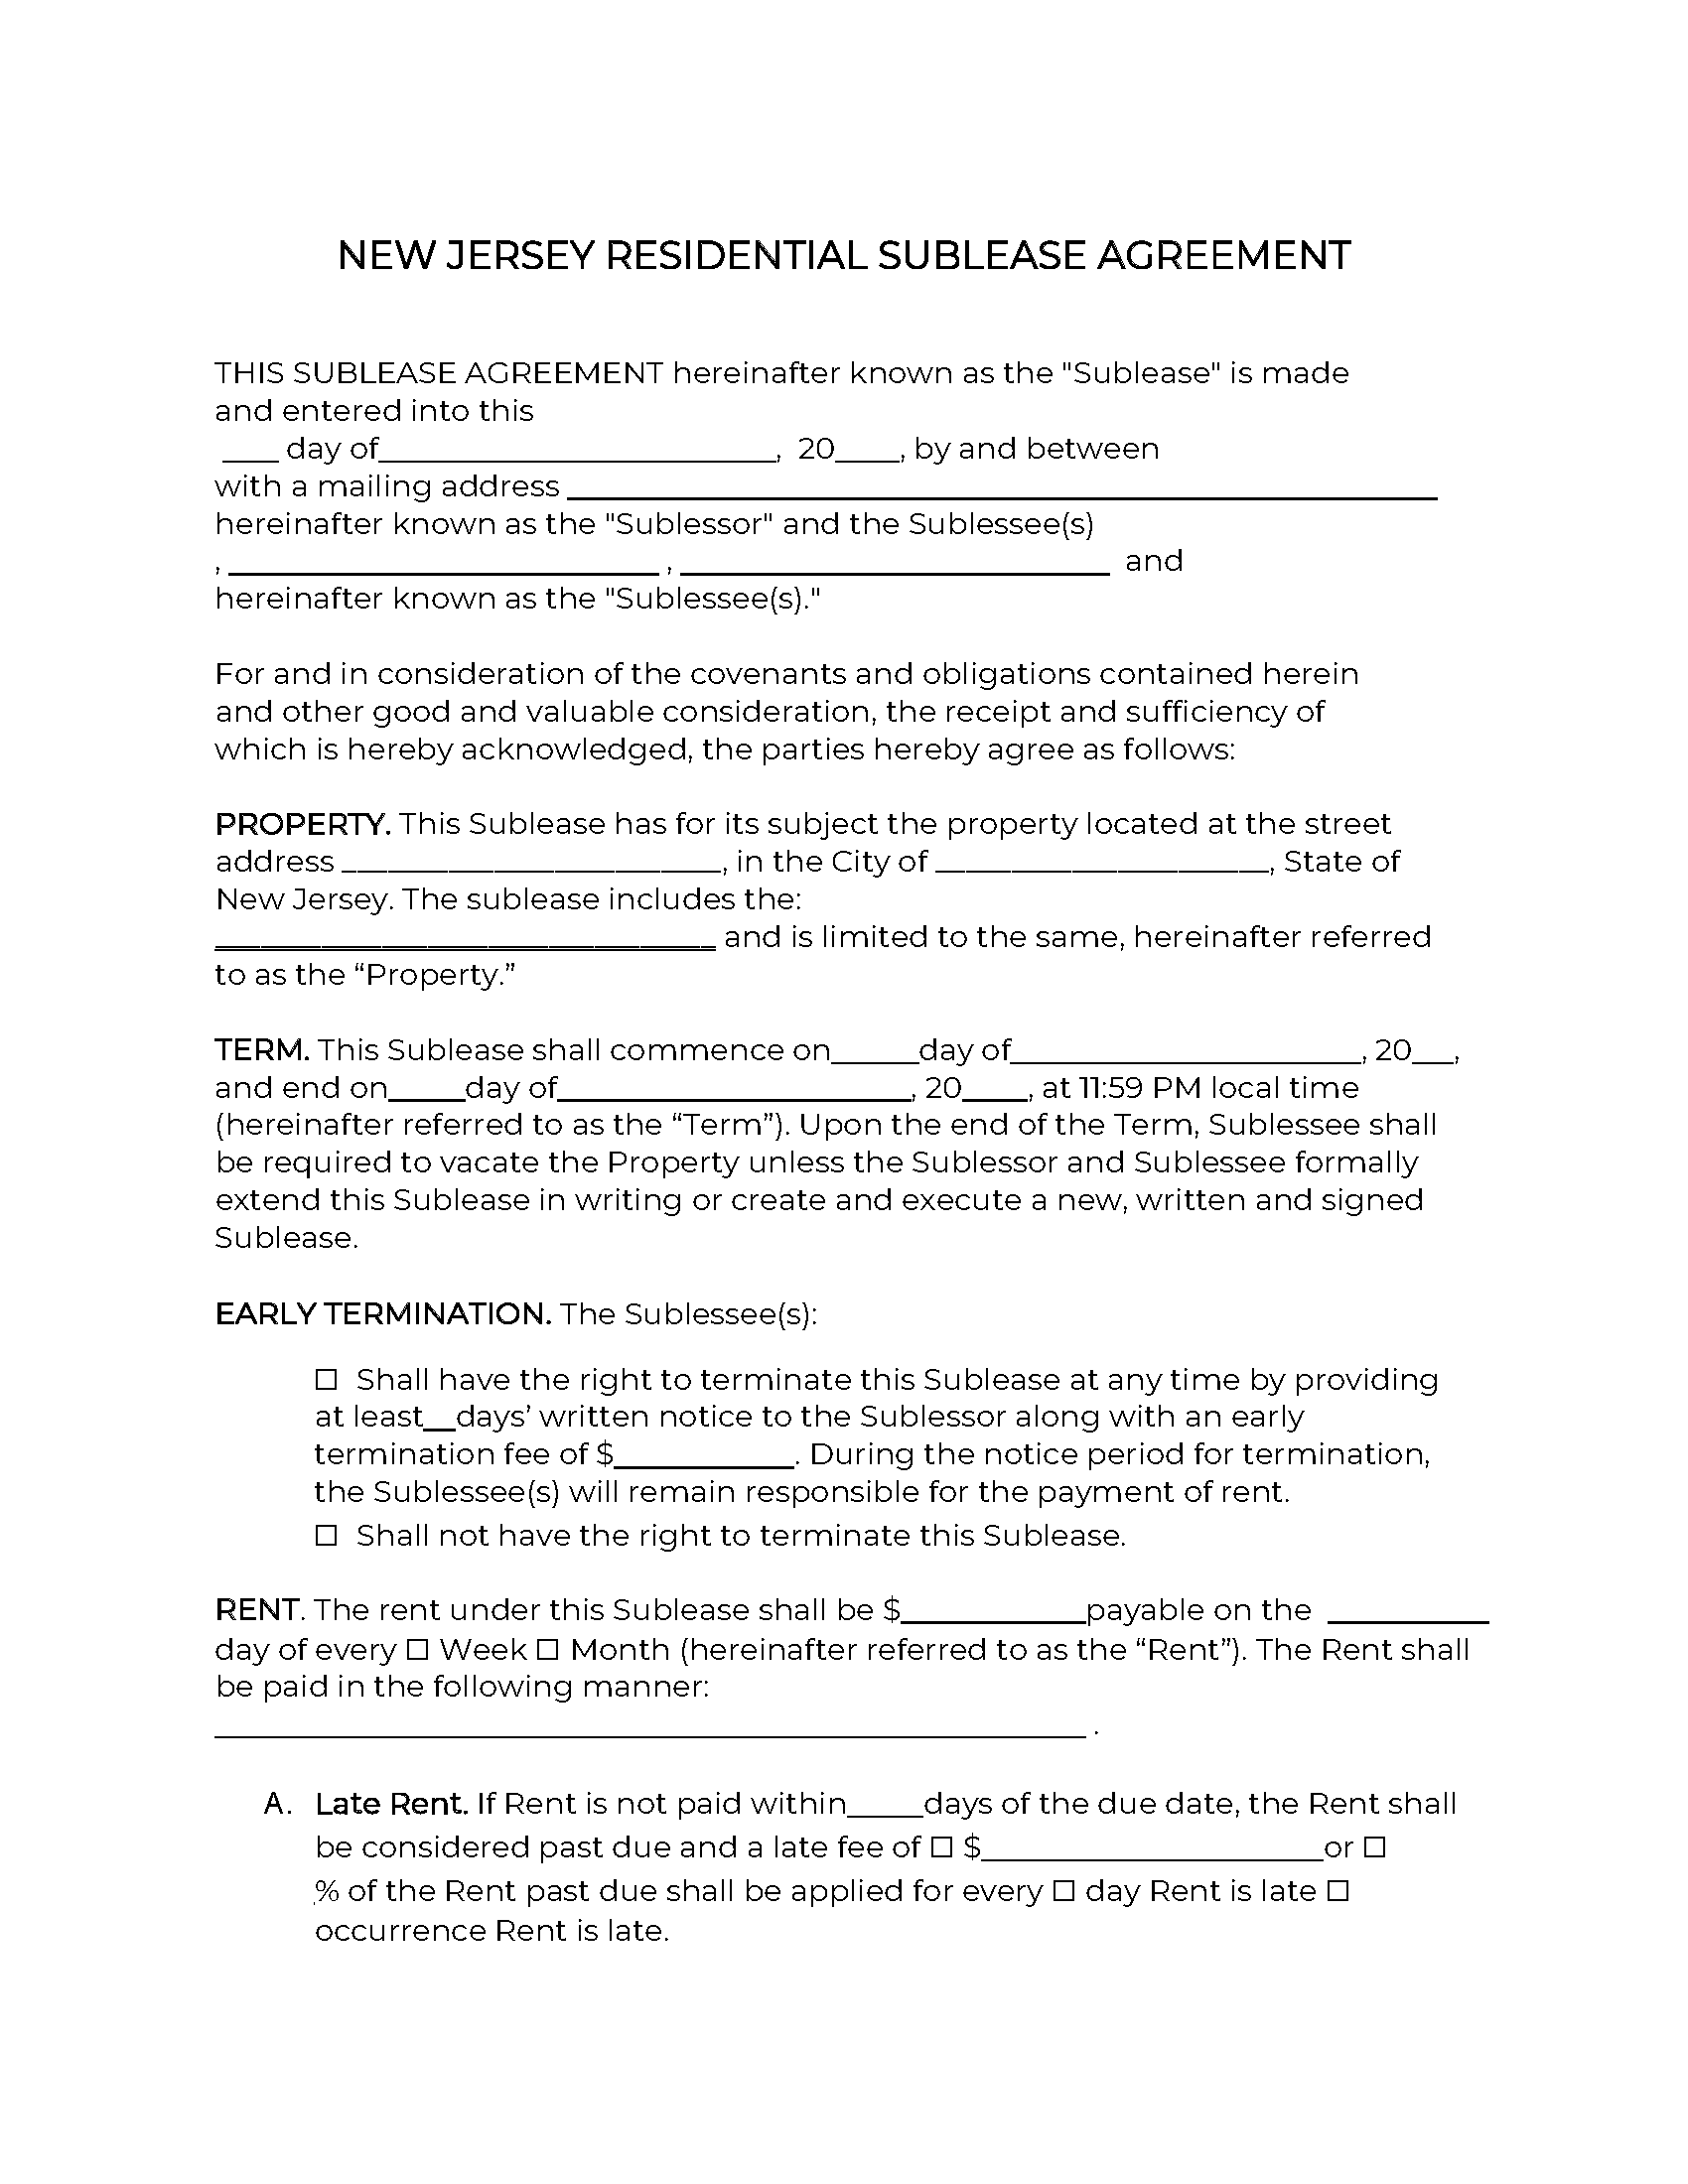 free-new-jersey-sublease-agreement-template-pdf-word-rtf